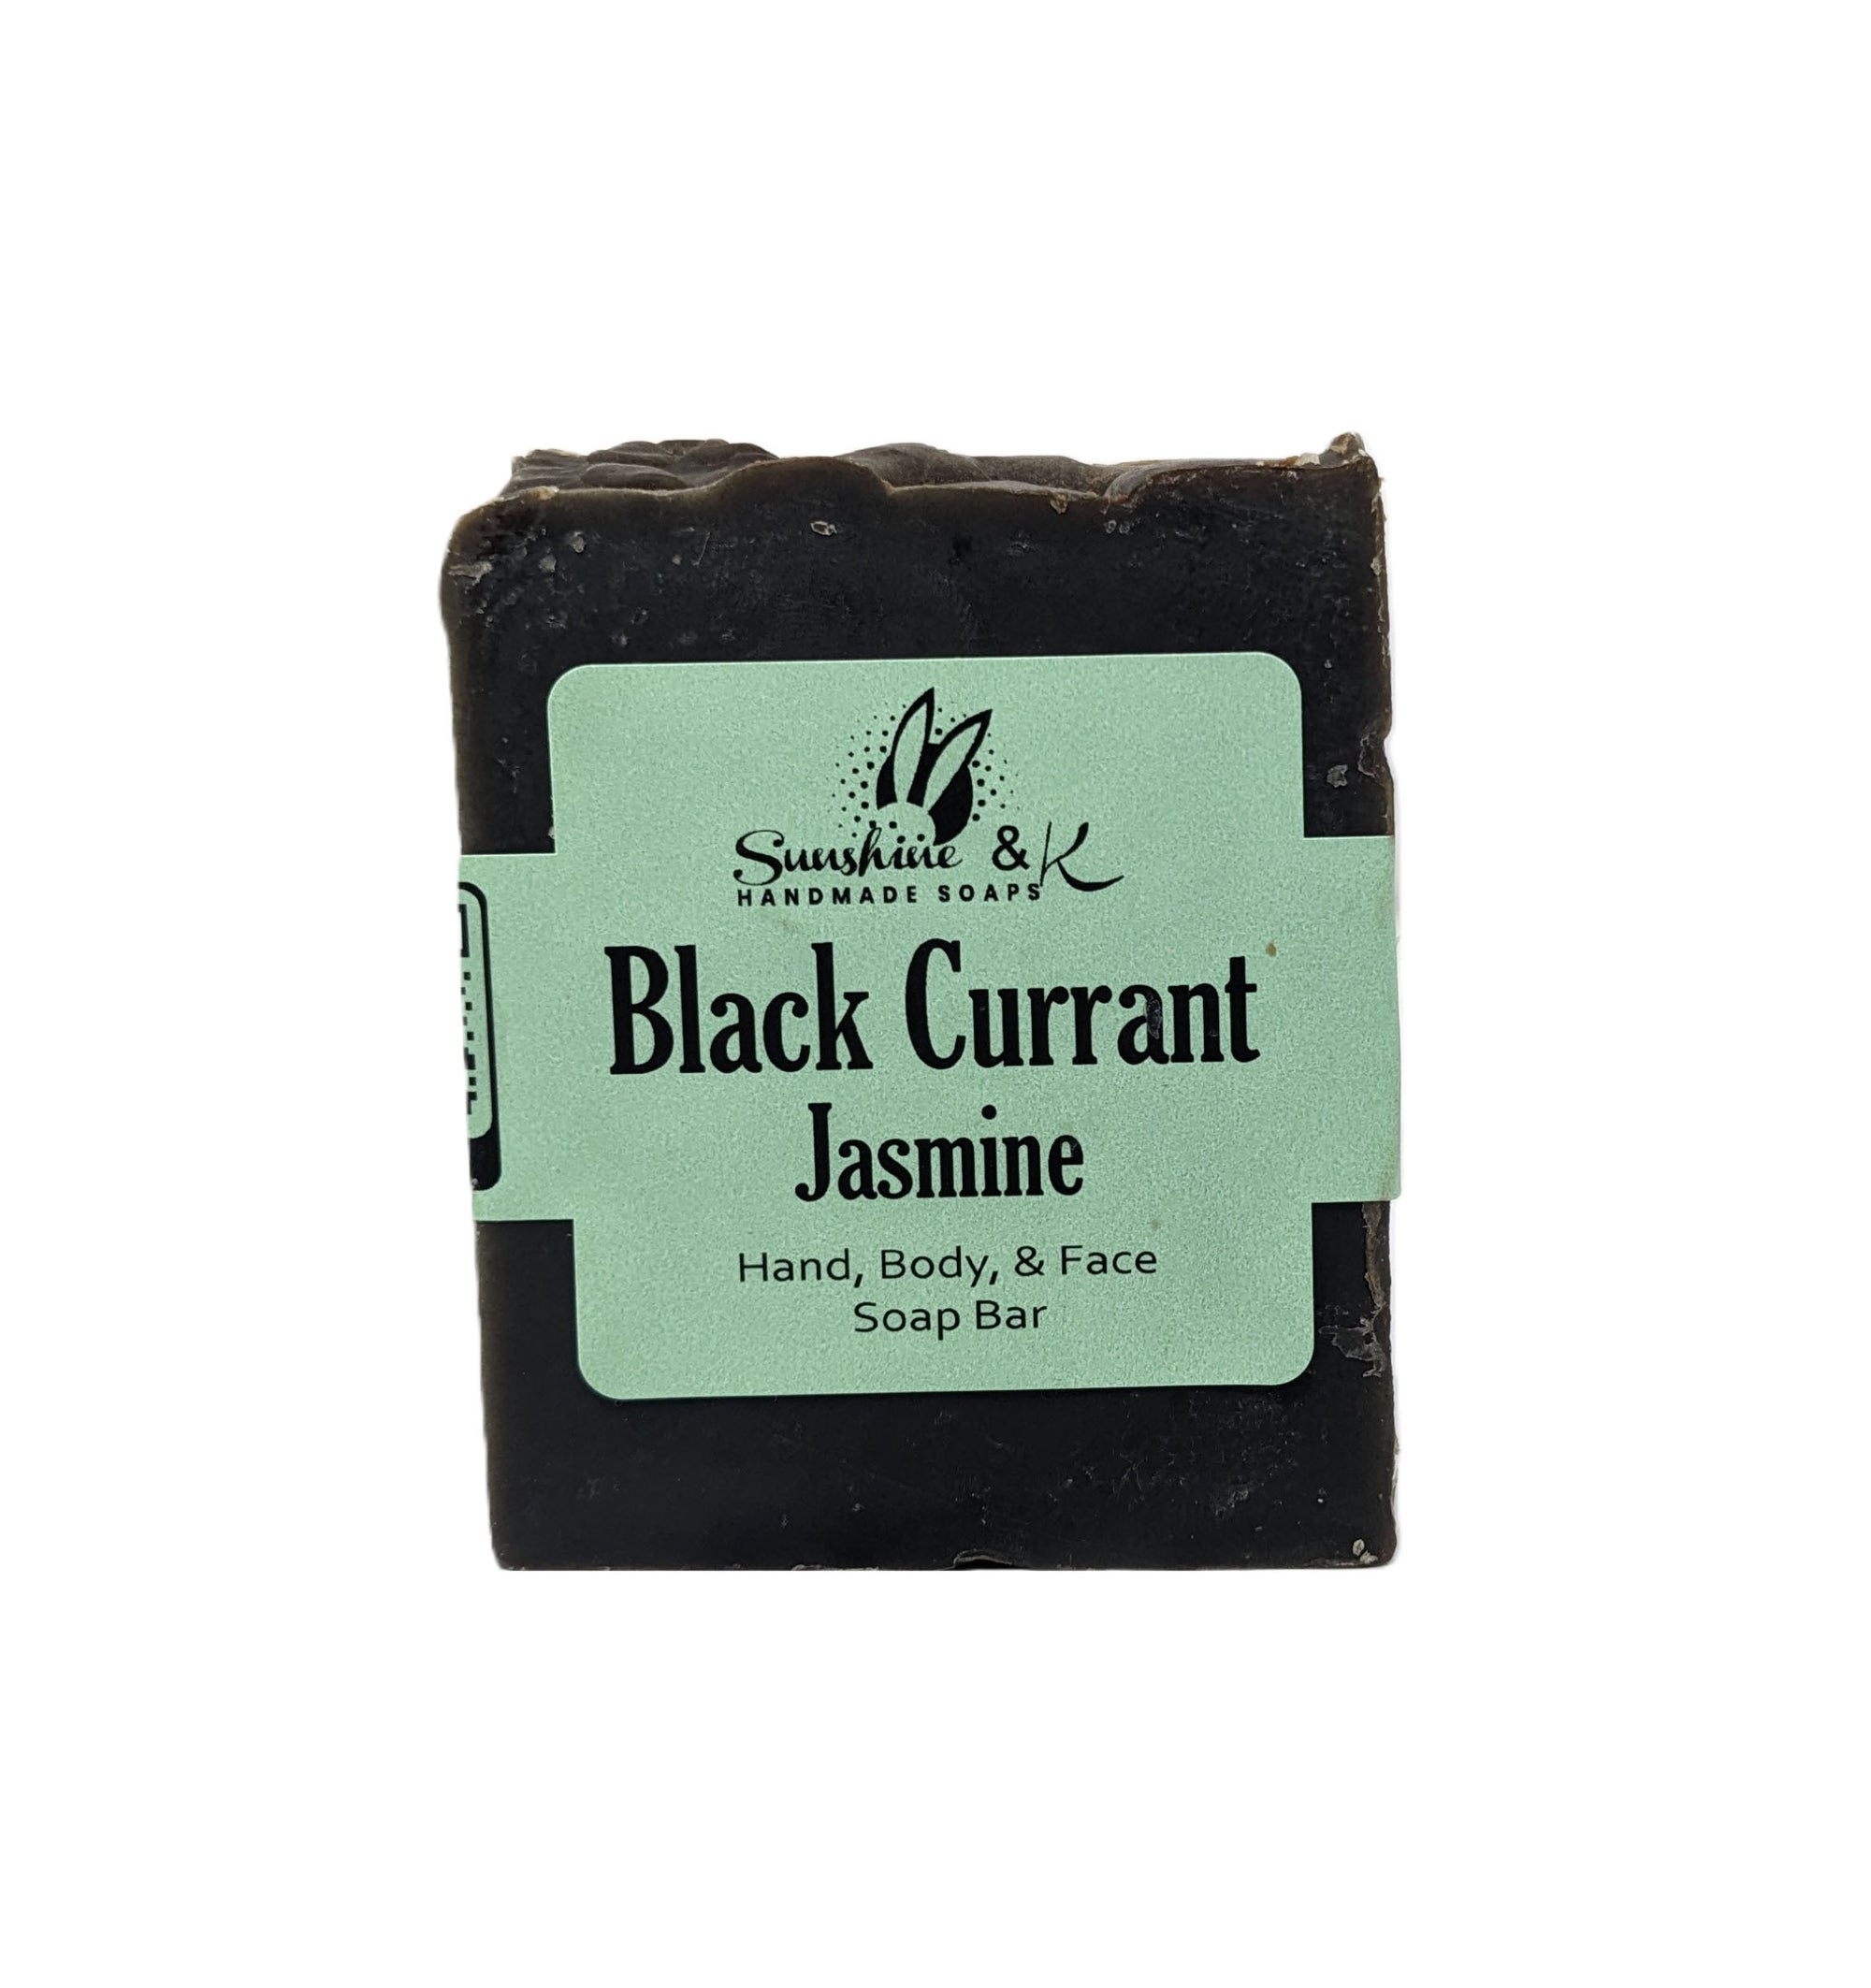 Black Currant Soap Bar with Activated Charcoal - Body & Face Bar Soap, Handmade Bath Soap, Moisturizing Bar Soap With Beeswax, Rice Bran Oil, & Natural Base Oils, Natural Soap Bars, 5 oz